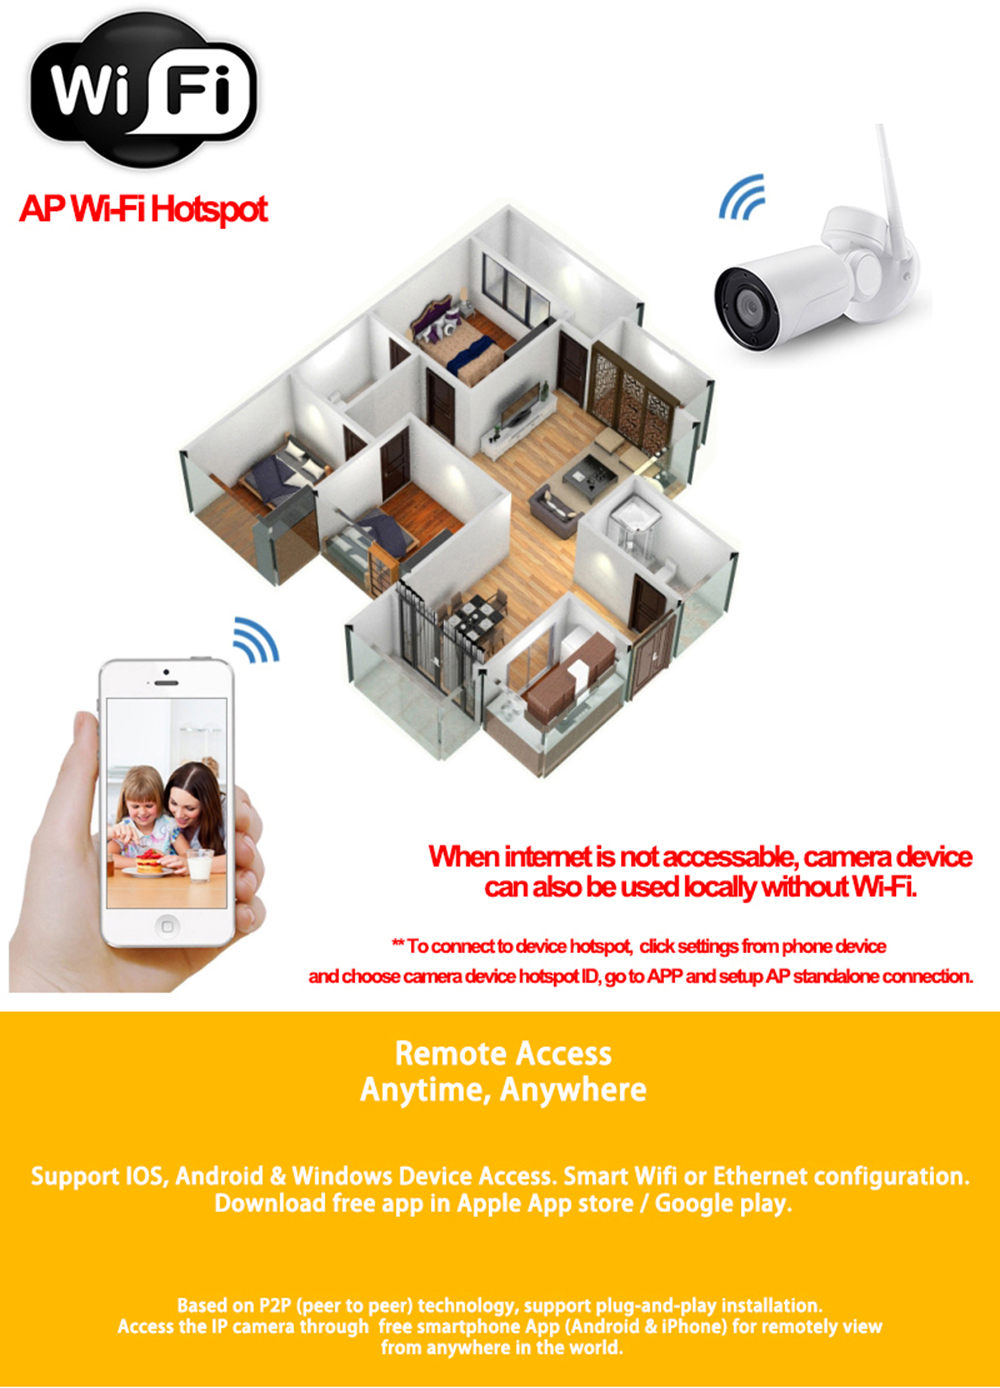 AP WiFi hotspot, when Internet is not accessible, camera device can be used locally without Wi-Fi.